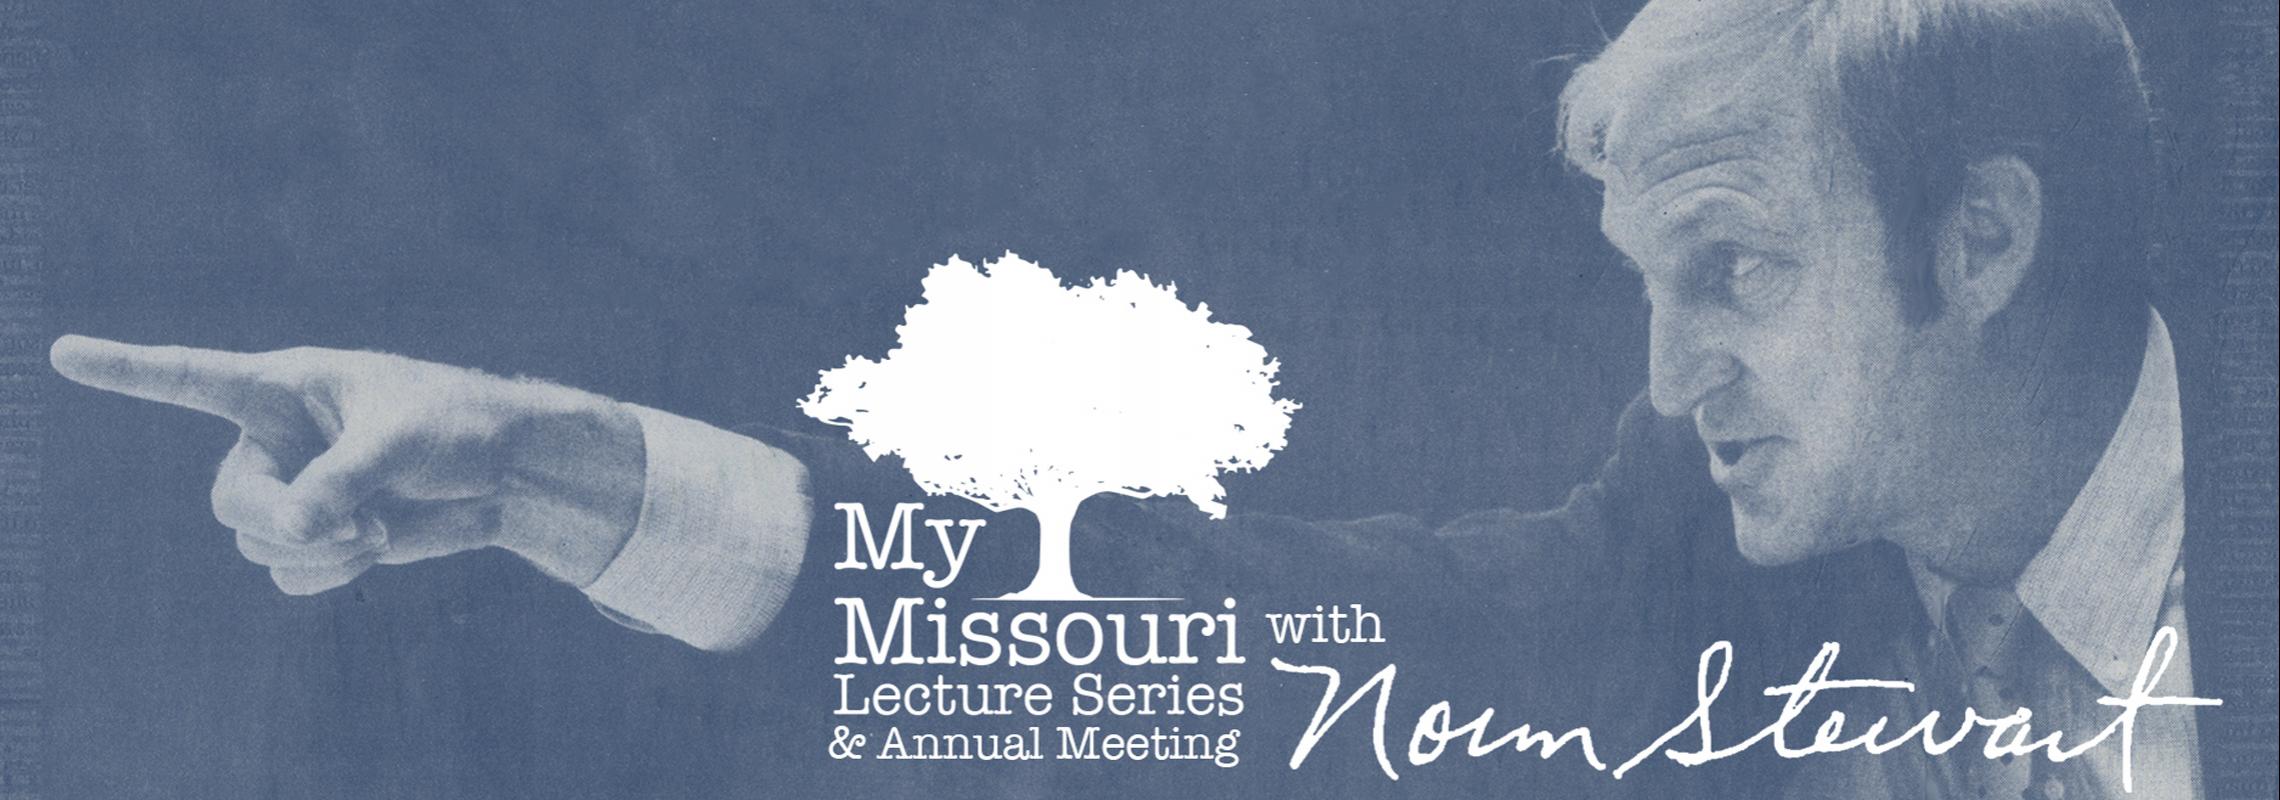 My Missouri Lecture Series and Annual Meeting with Norm Stewart